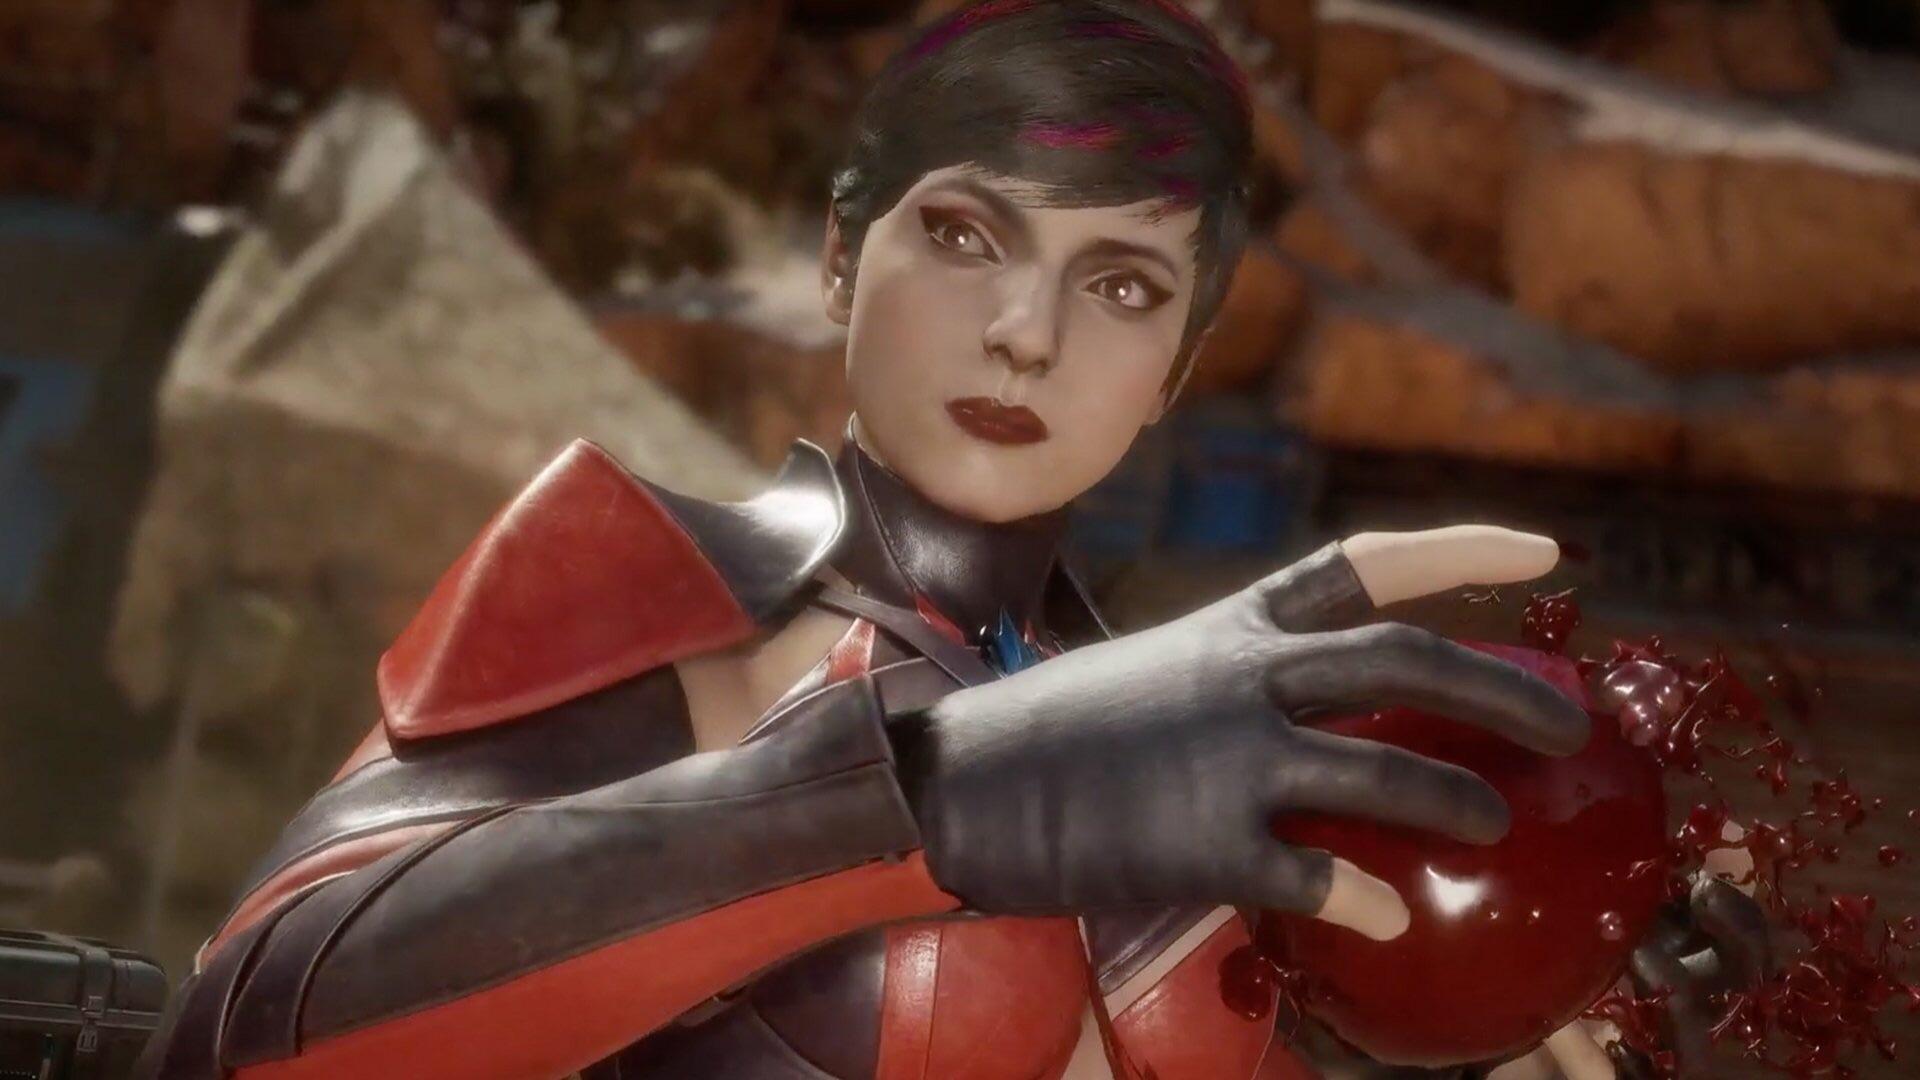 I can't be the only one who thinks the new Skarlet is hot right